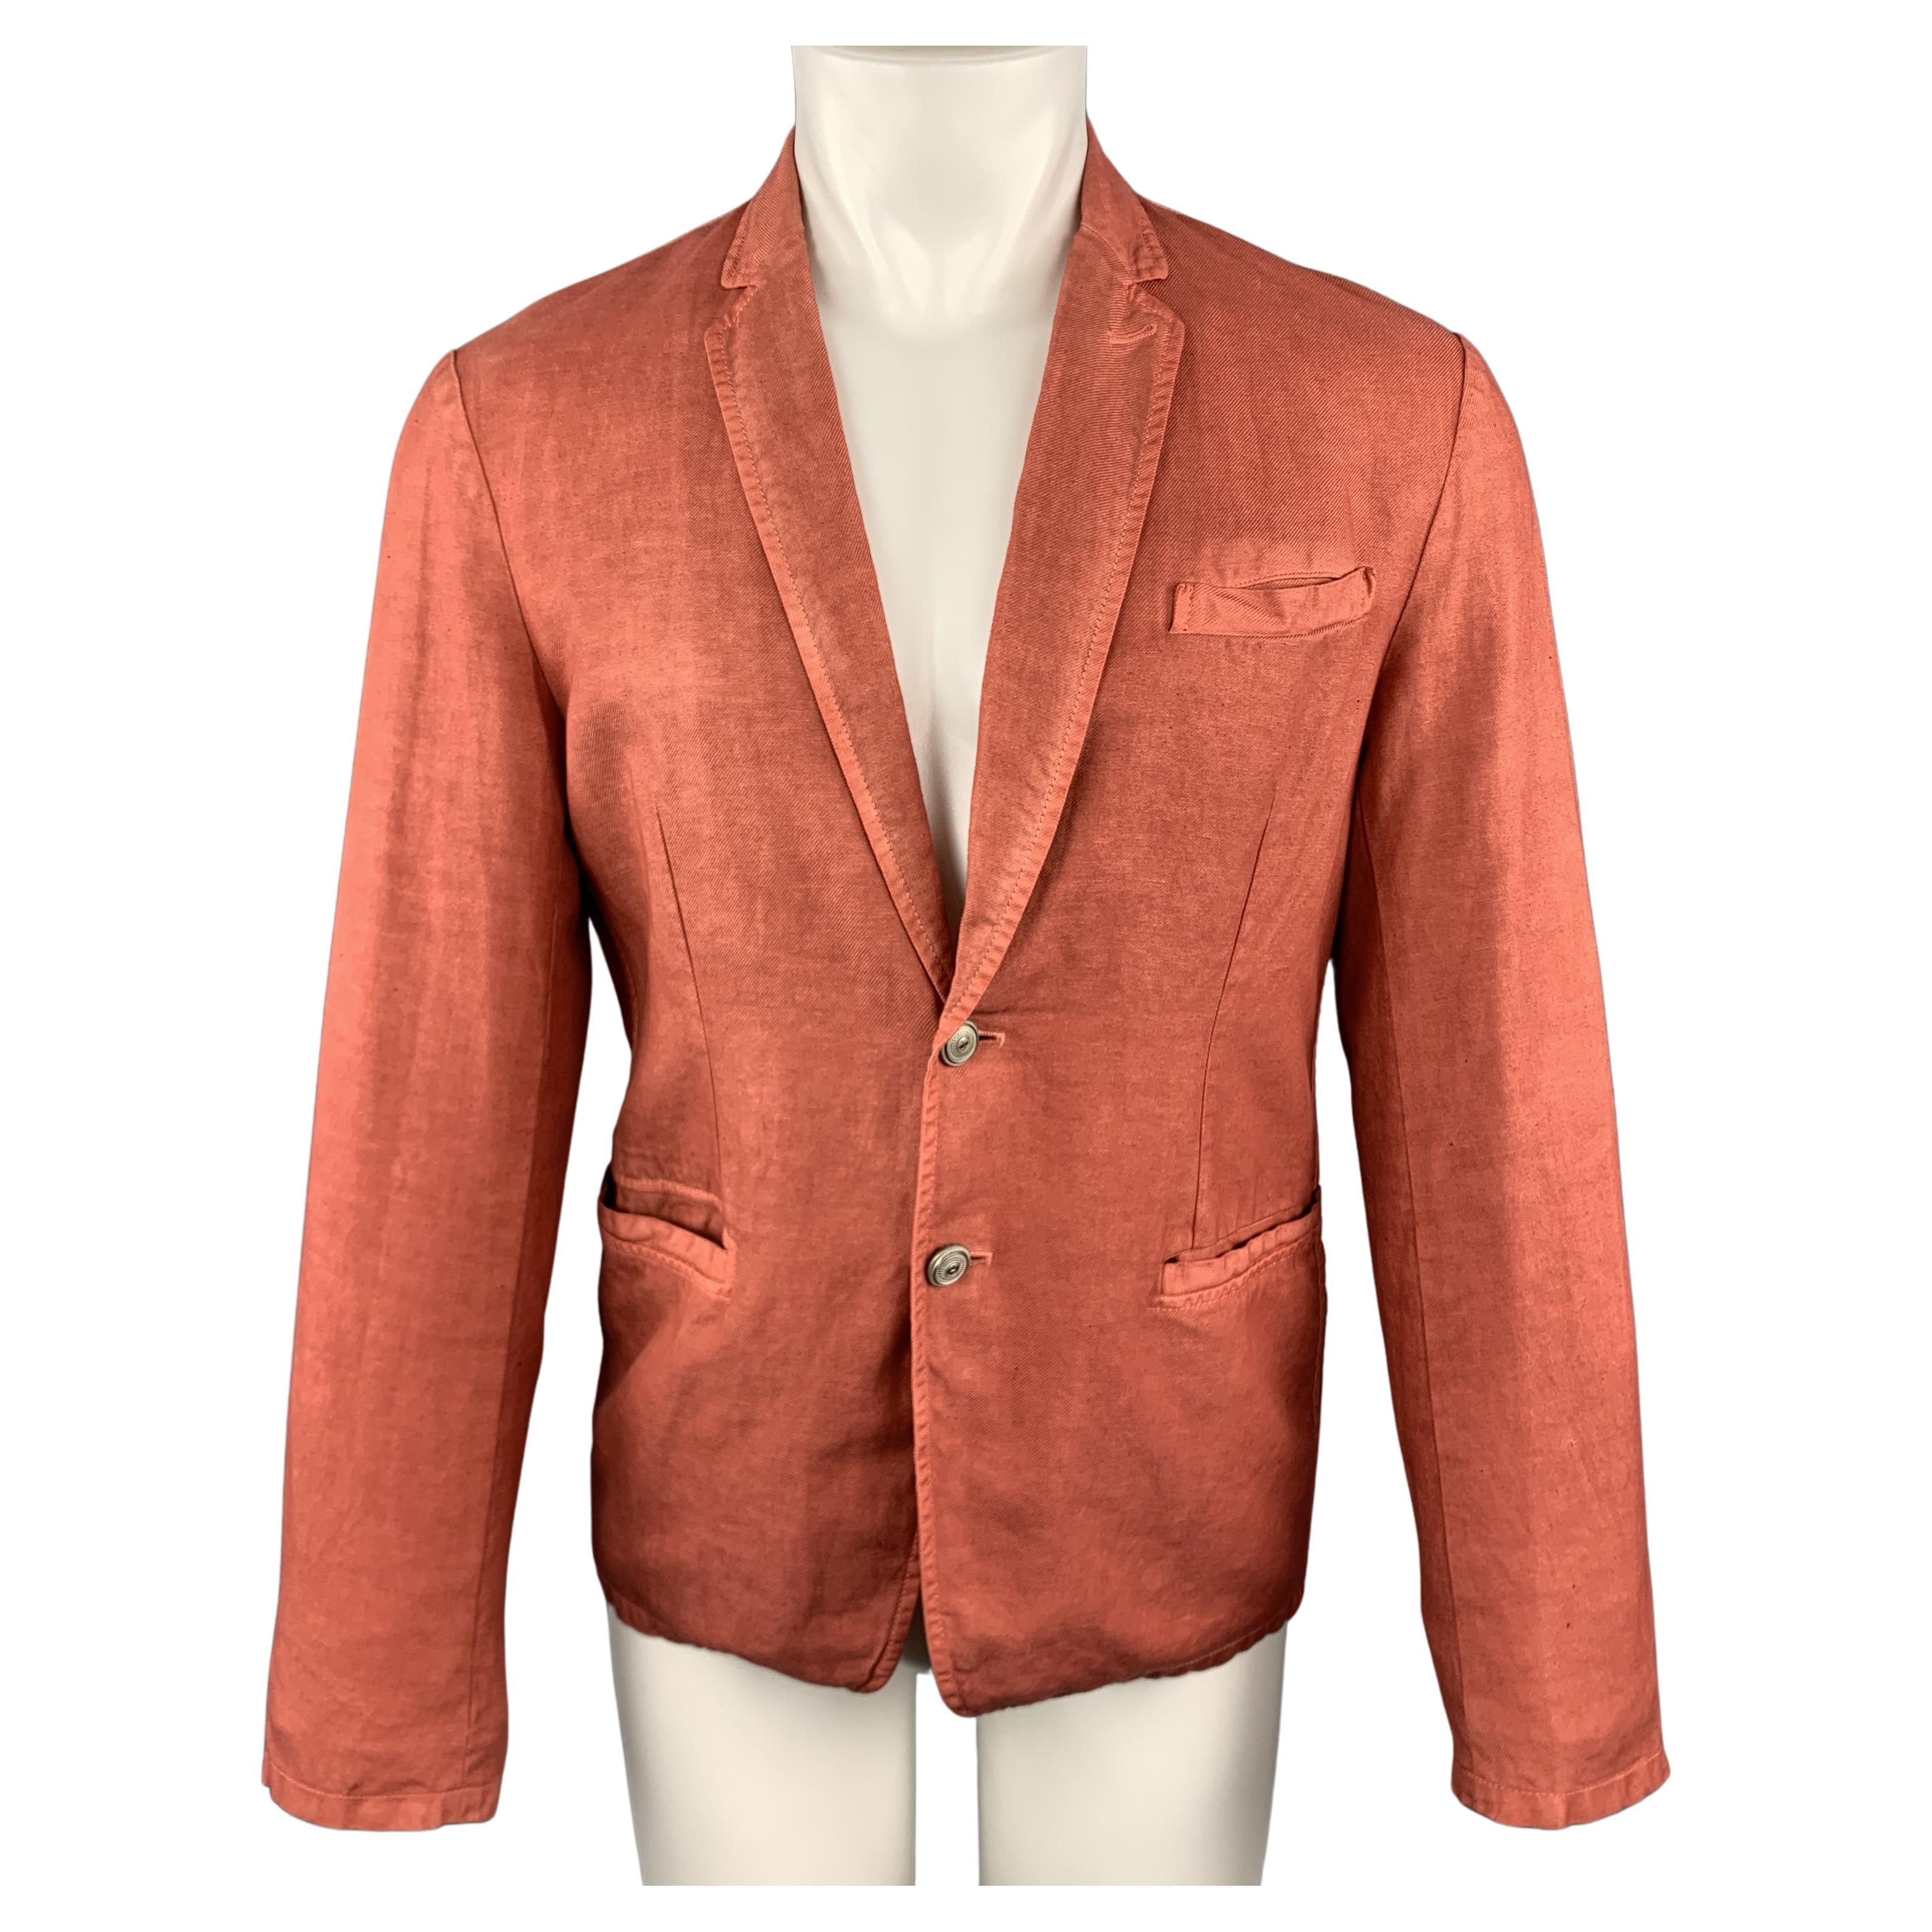 JUST CAVALLI Washed Brick Red Cotton / Linen Notch Lapel Sport Coat For Sale